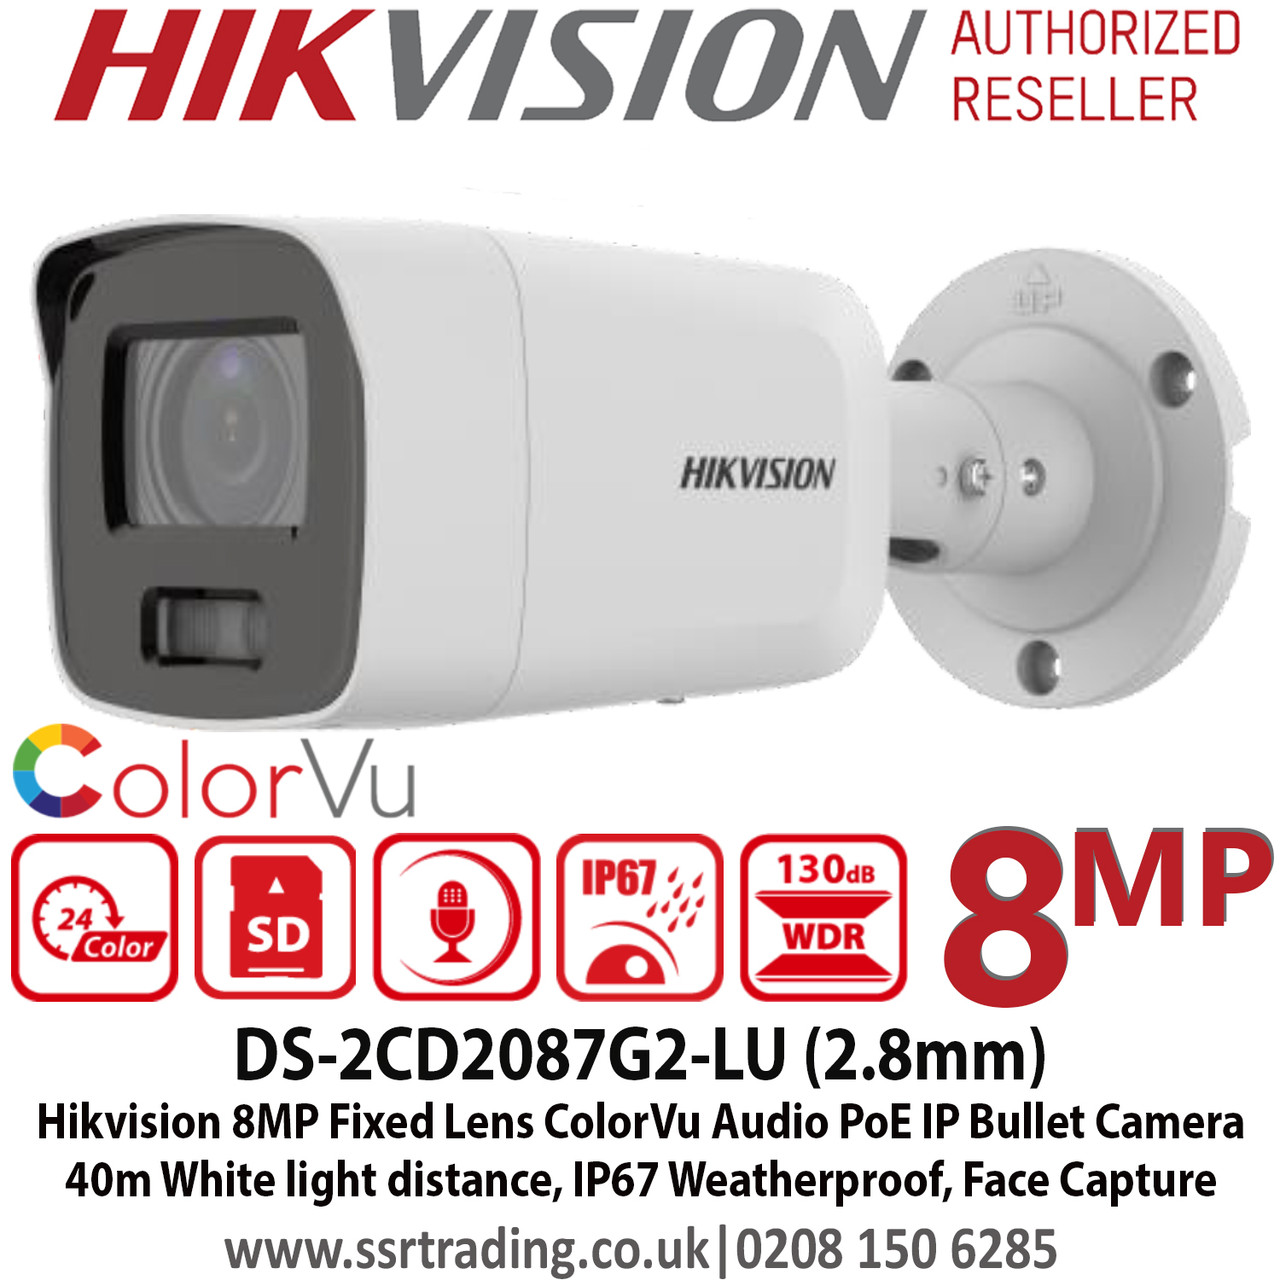 Hikvision DS-2CD2087G2-LU 8MP 2.8mm Fixed Lens ColorVu Audio Network Bullet  CCTV Camera, 40m White Light Distance, IP67 Weatherproof, Built in MIC,  Supports on board storage, Smart motion detection, 24/7 Full Color Imaging